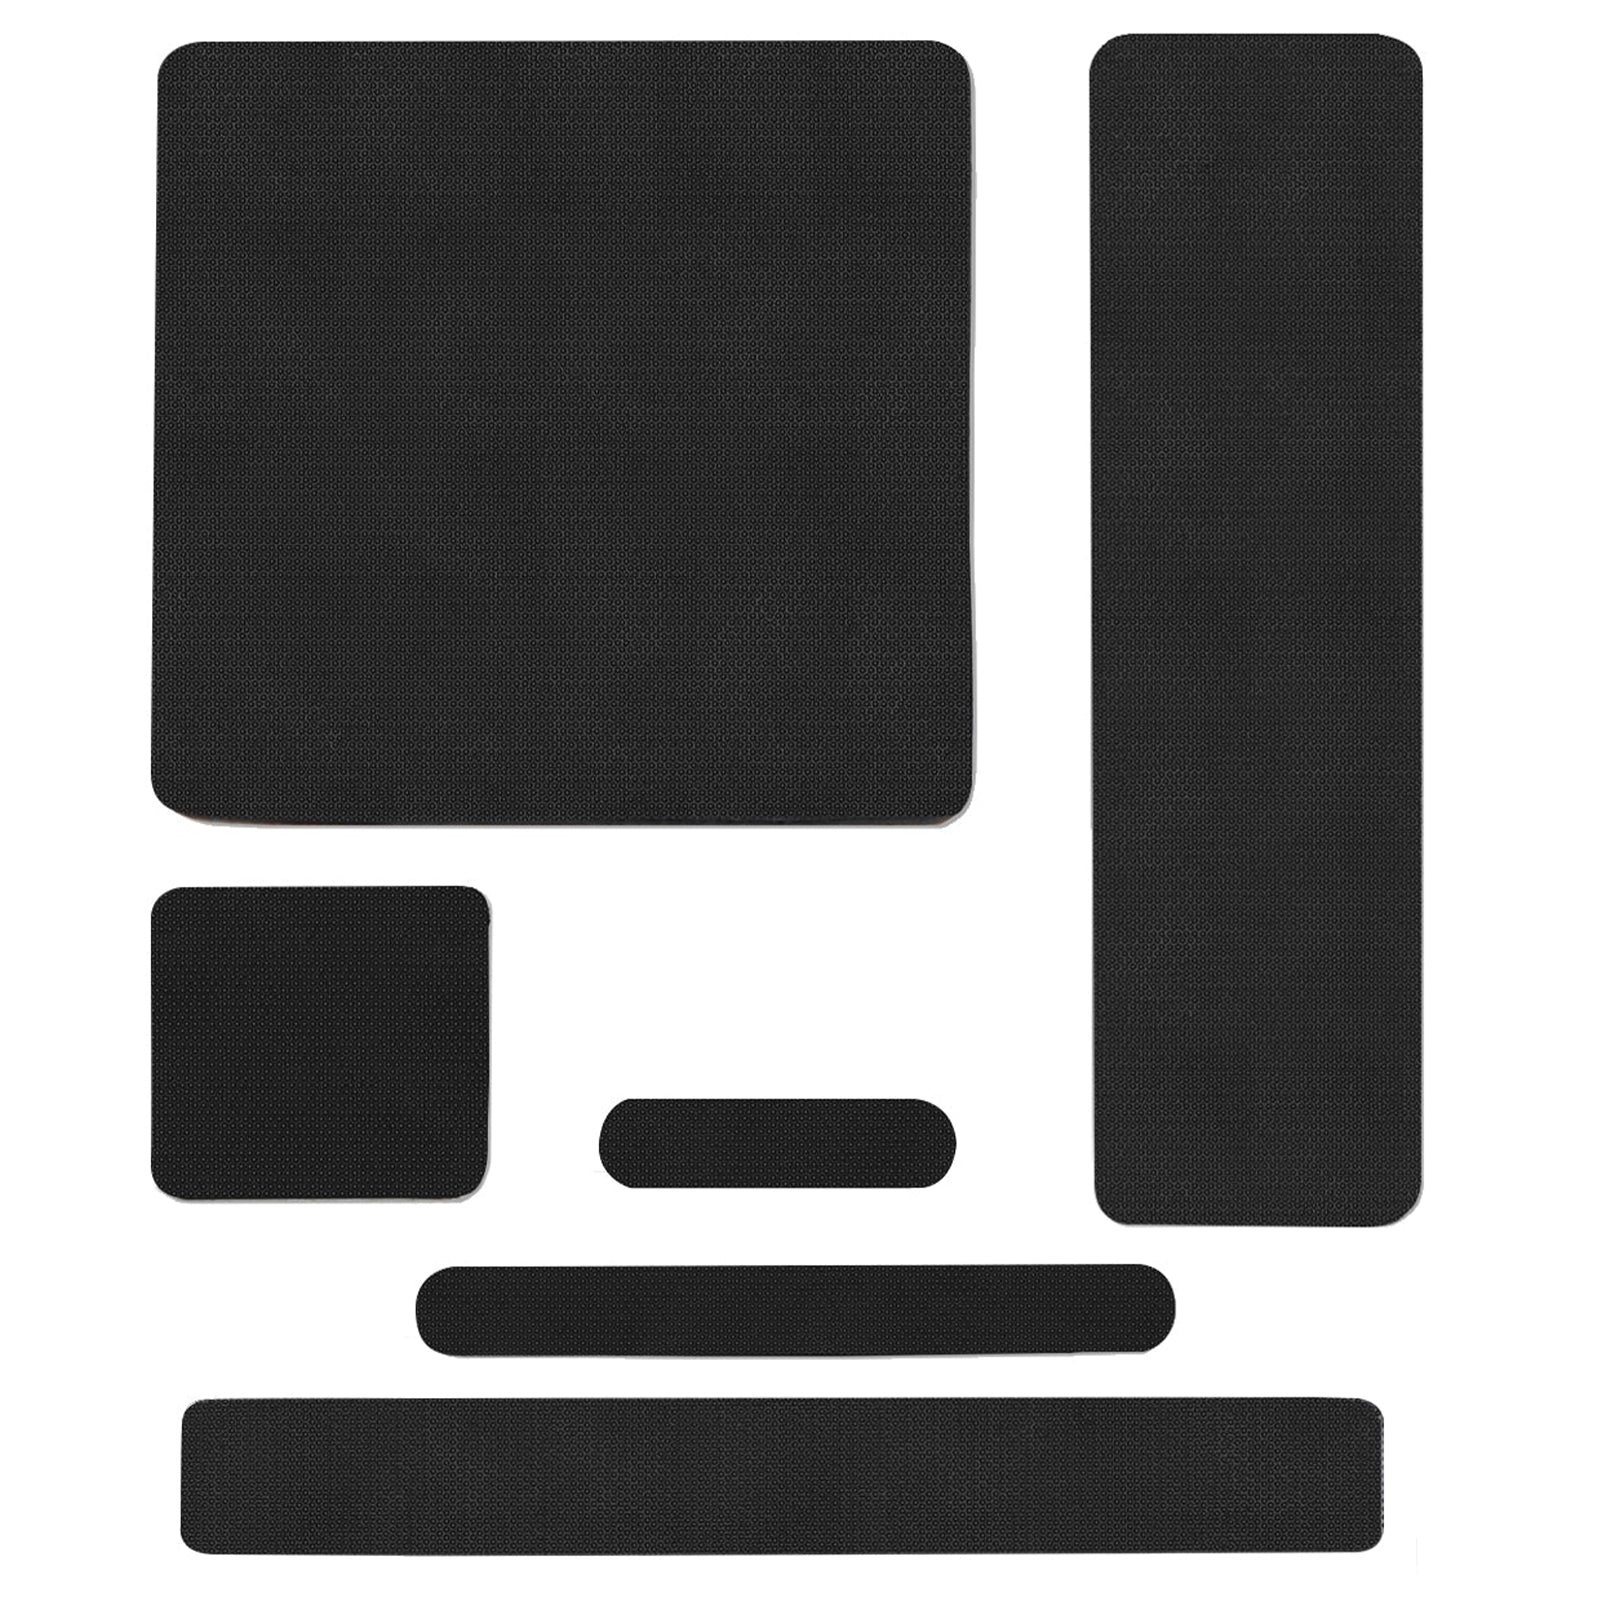 Setex® Black Gripping Kit - Assorted Shapes